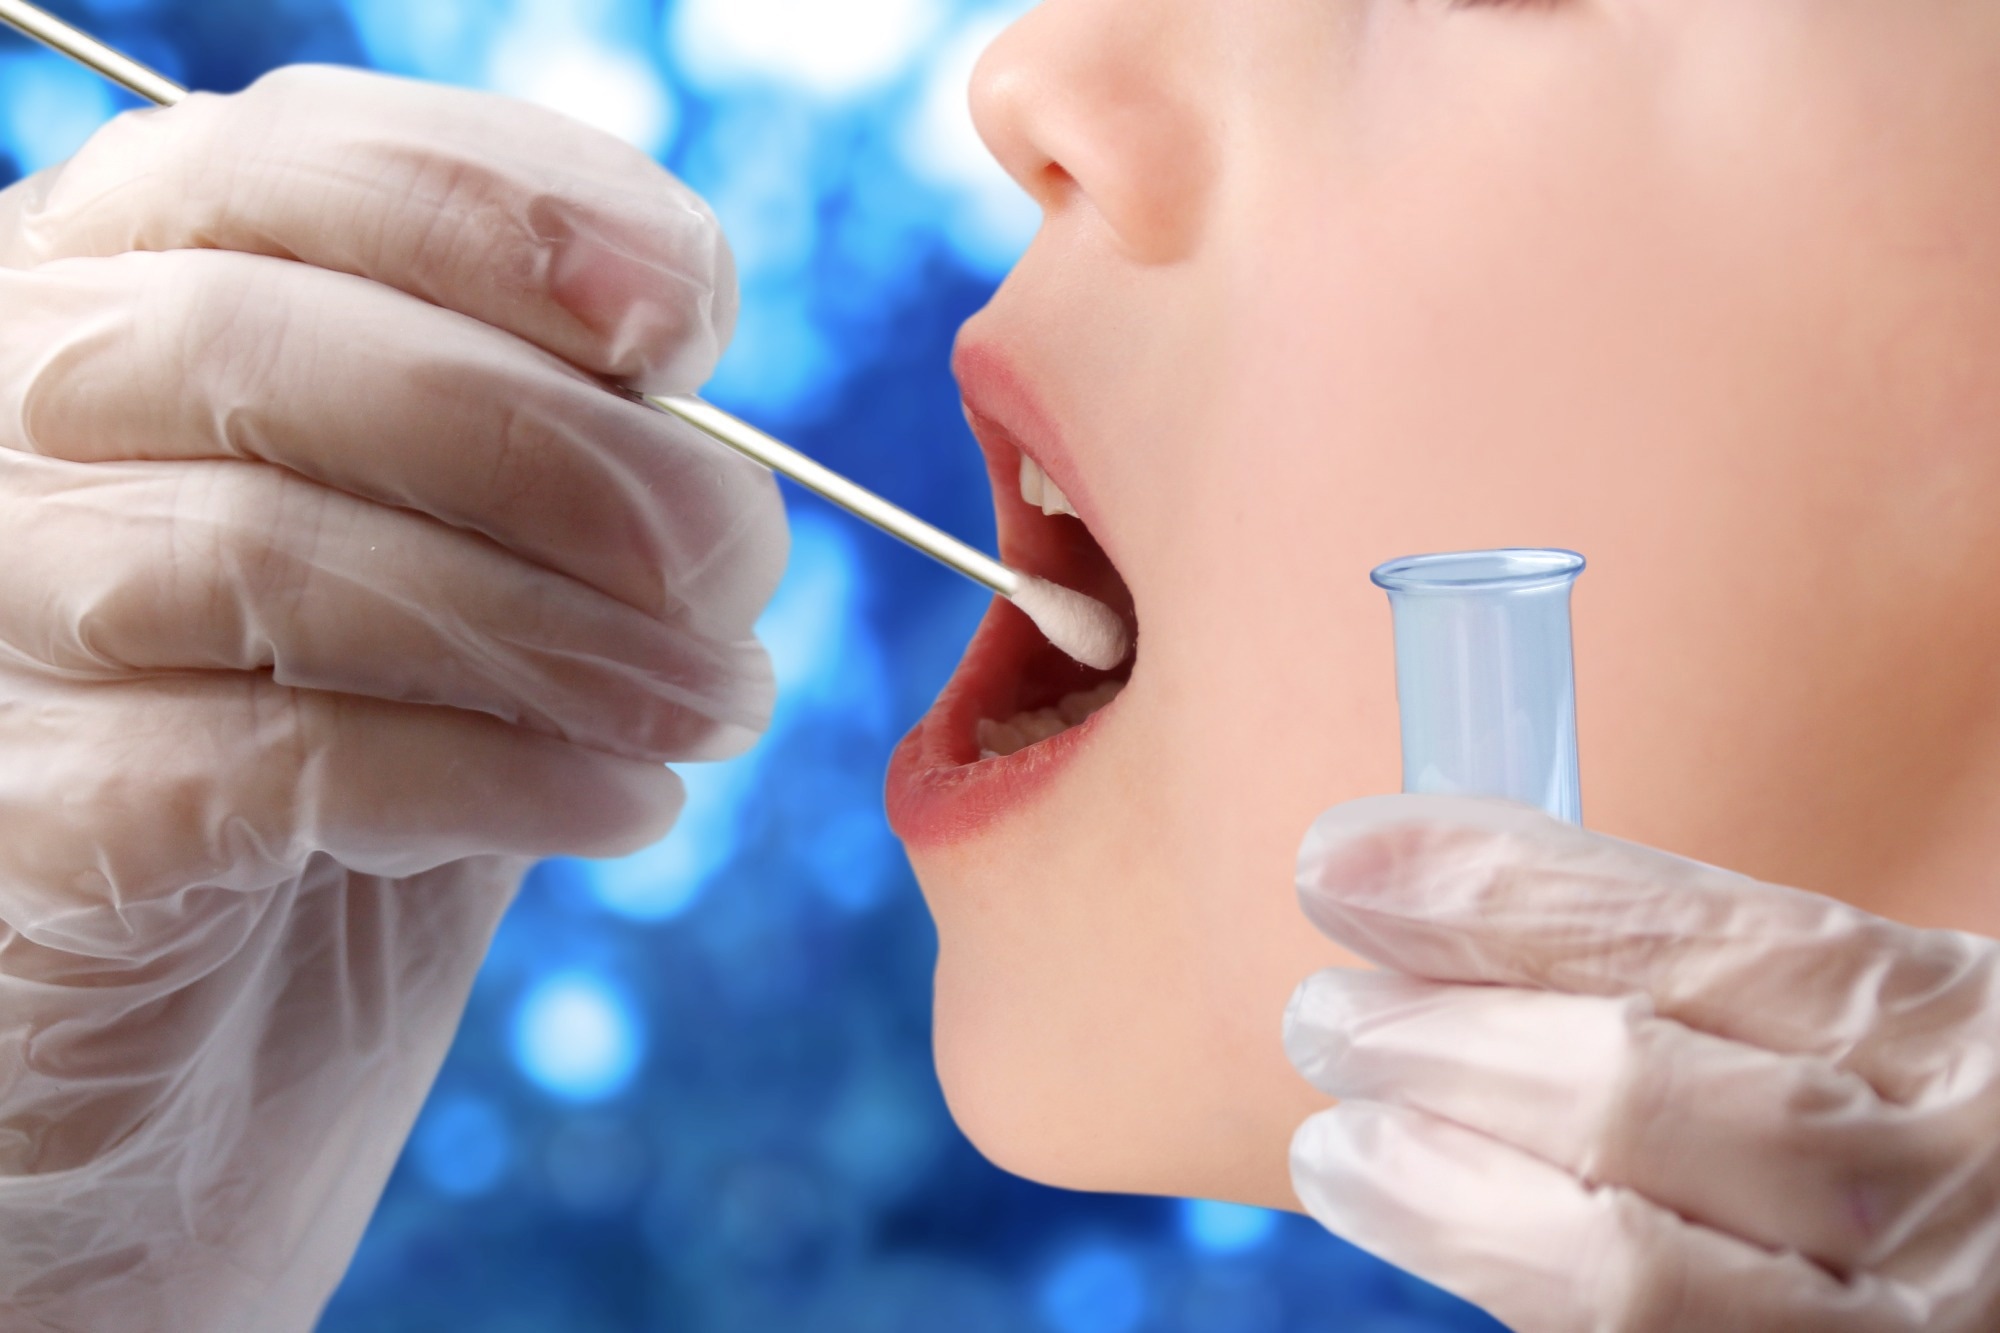 Study: Oral SARS-CoV-2 host responses predict the early COVID-19 disease course. Image Credit: Kittyfly / Shutterstock